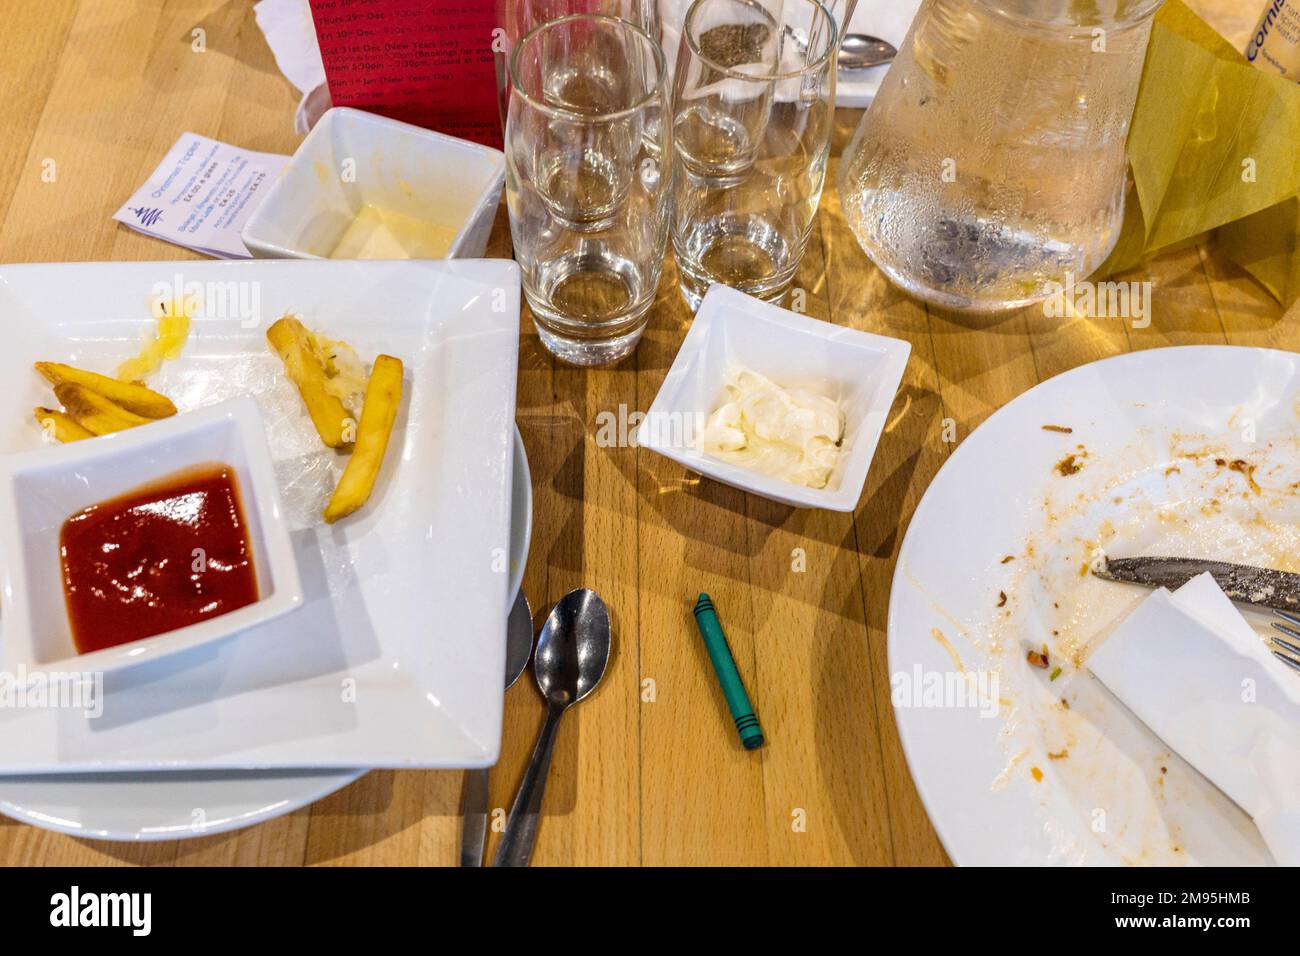 An overhead view of a table after a meal in a restaurant. Stock Photo